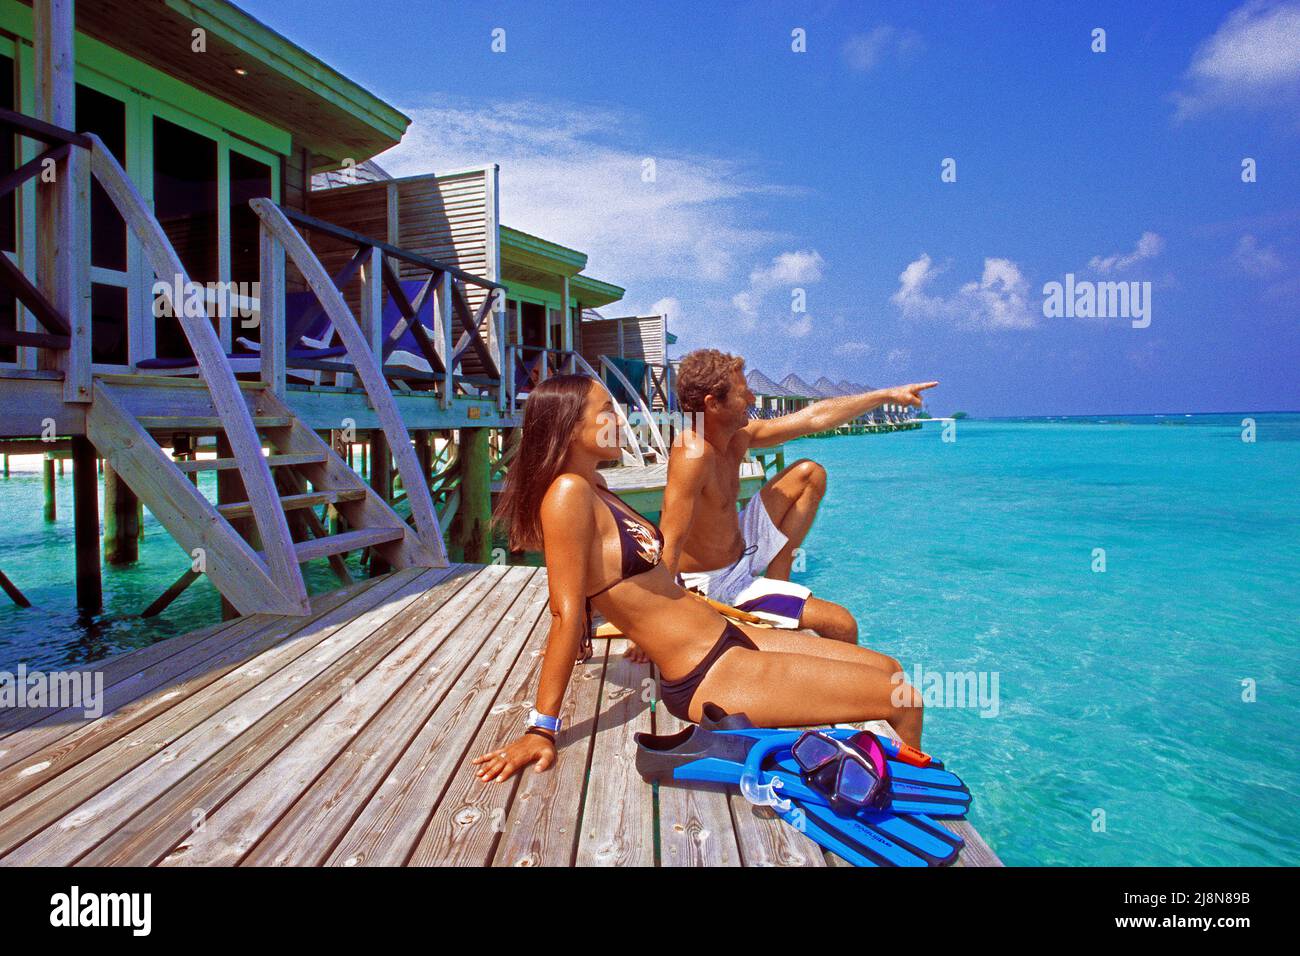 Couple sitting on a platform at the over-water bungalows, Kuredu, Laviyani Atoll, Indian Ocean, Asia Stock Photo